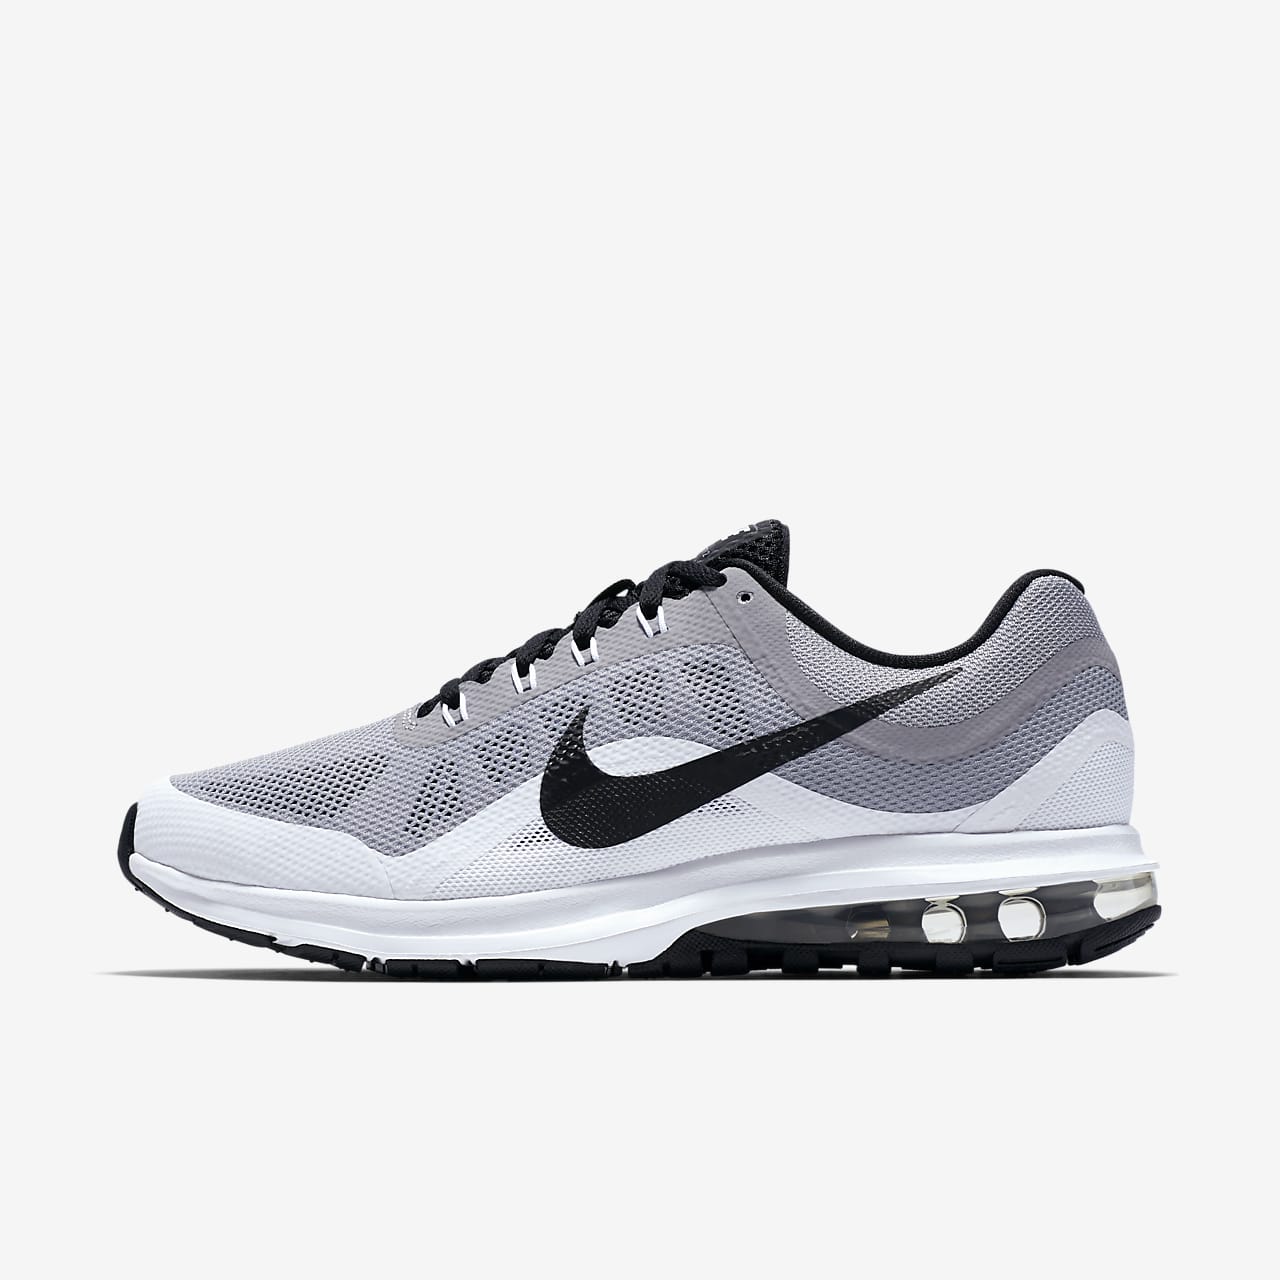 nike air max dynasty men's running shoes